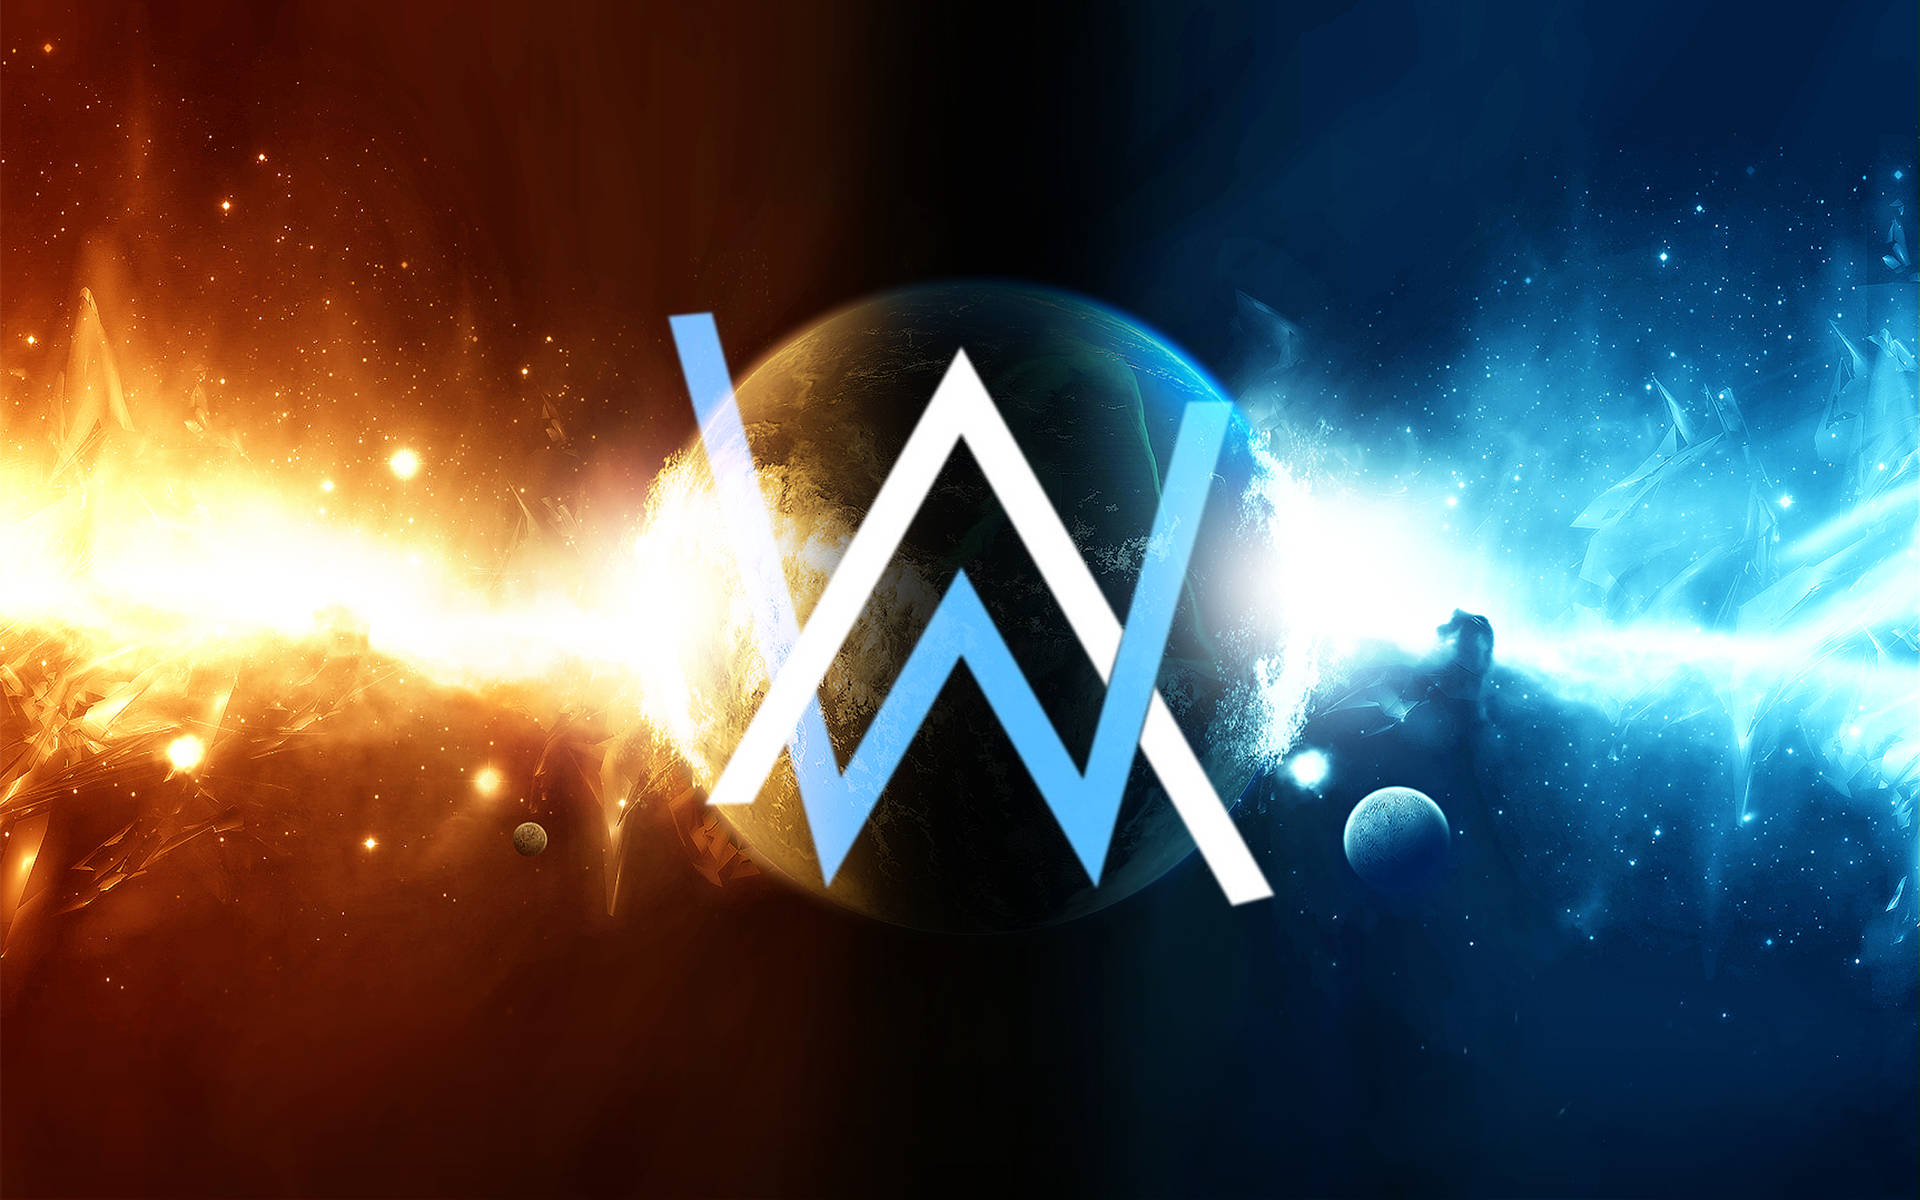 Blue And White Alan Walker Logo On Outer Space Wallpaper